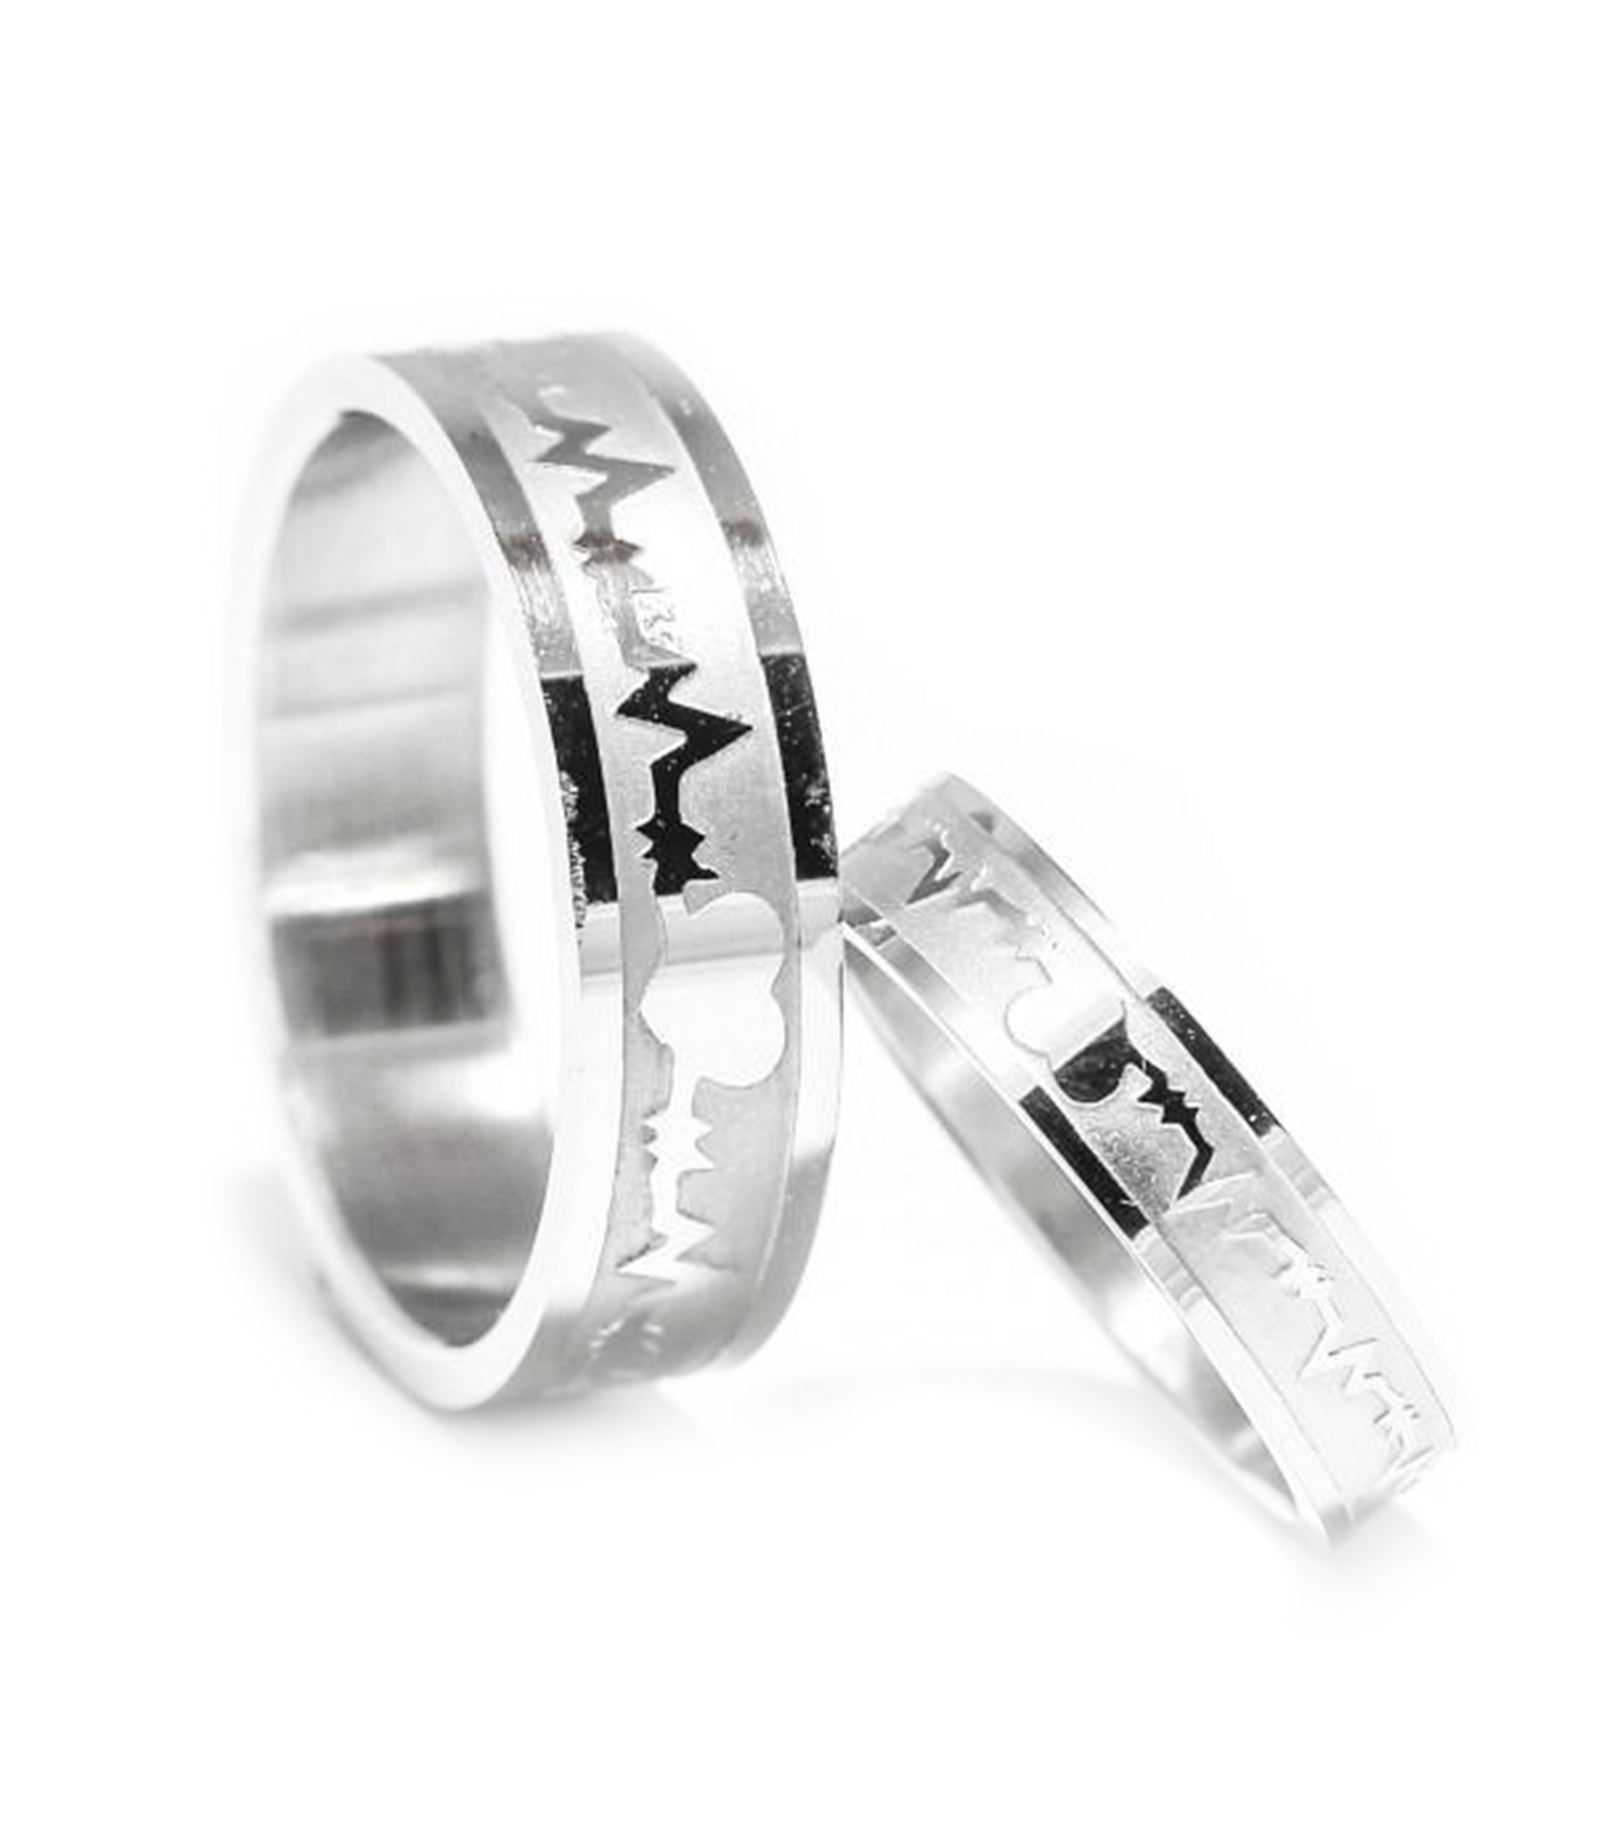 Buy Thrillz Silver Ring For Women Heartbeat Silver Adjustable Couple Ring  For Women Girls Men at Amazon.in